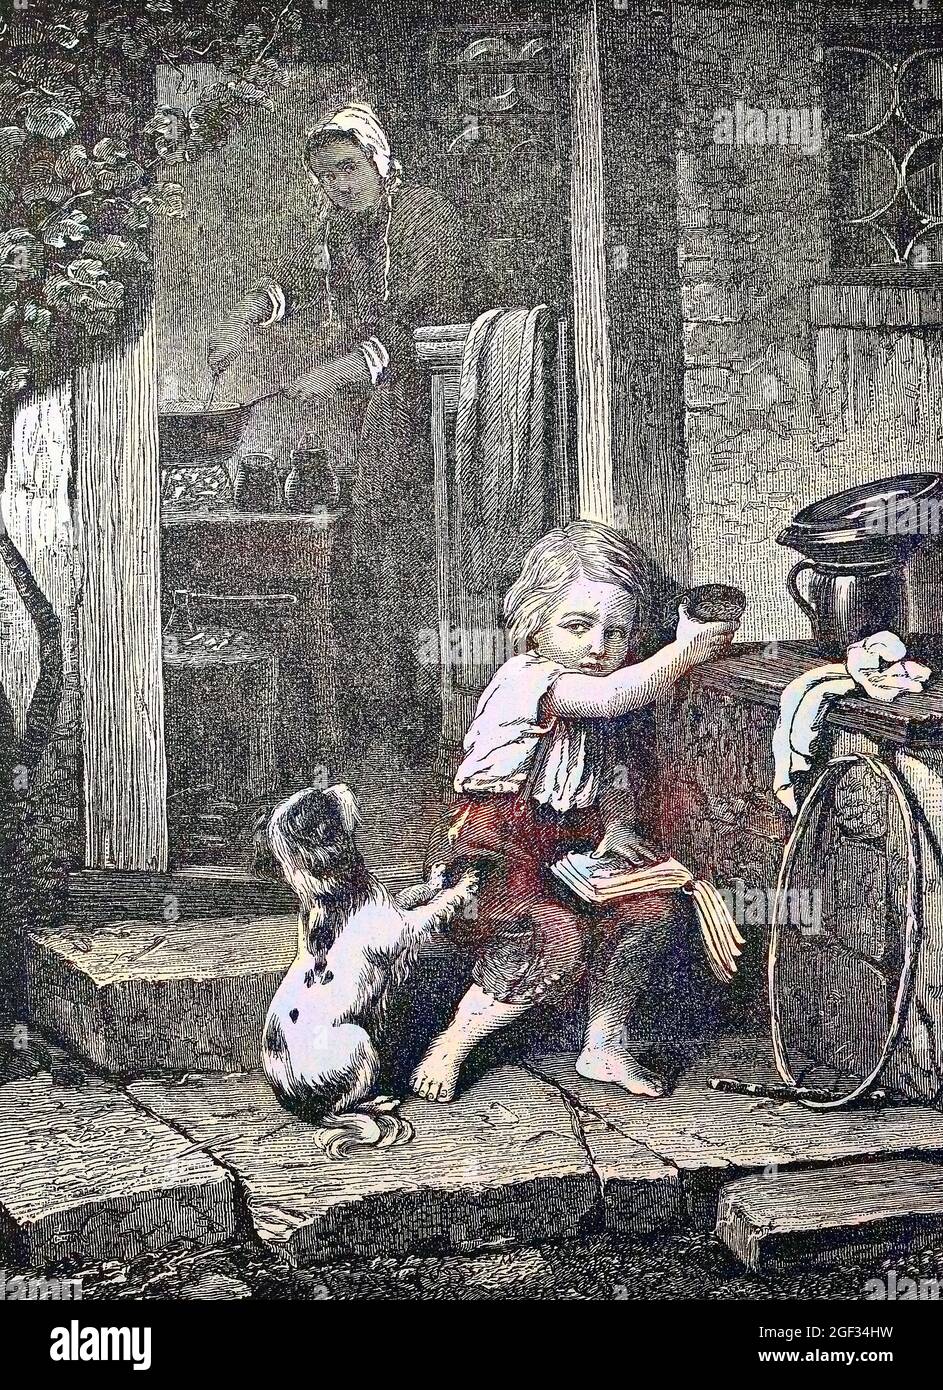 puppy begging for food, young dog wants the food of a boy, Junger Hund bettelt bei einem Kind um Futter, digital improved reproduction of an original print from the year 1881, Koloriert, Kolorierung, koloriert, handkoloriert, Hand-colouring, hand coloured, colored, Stock Photo